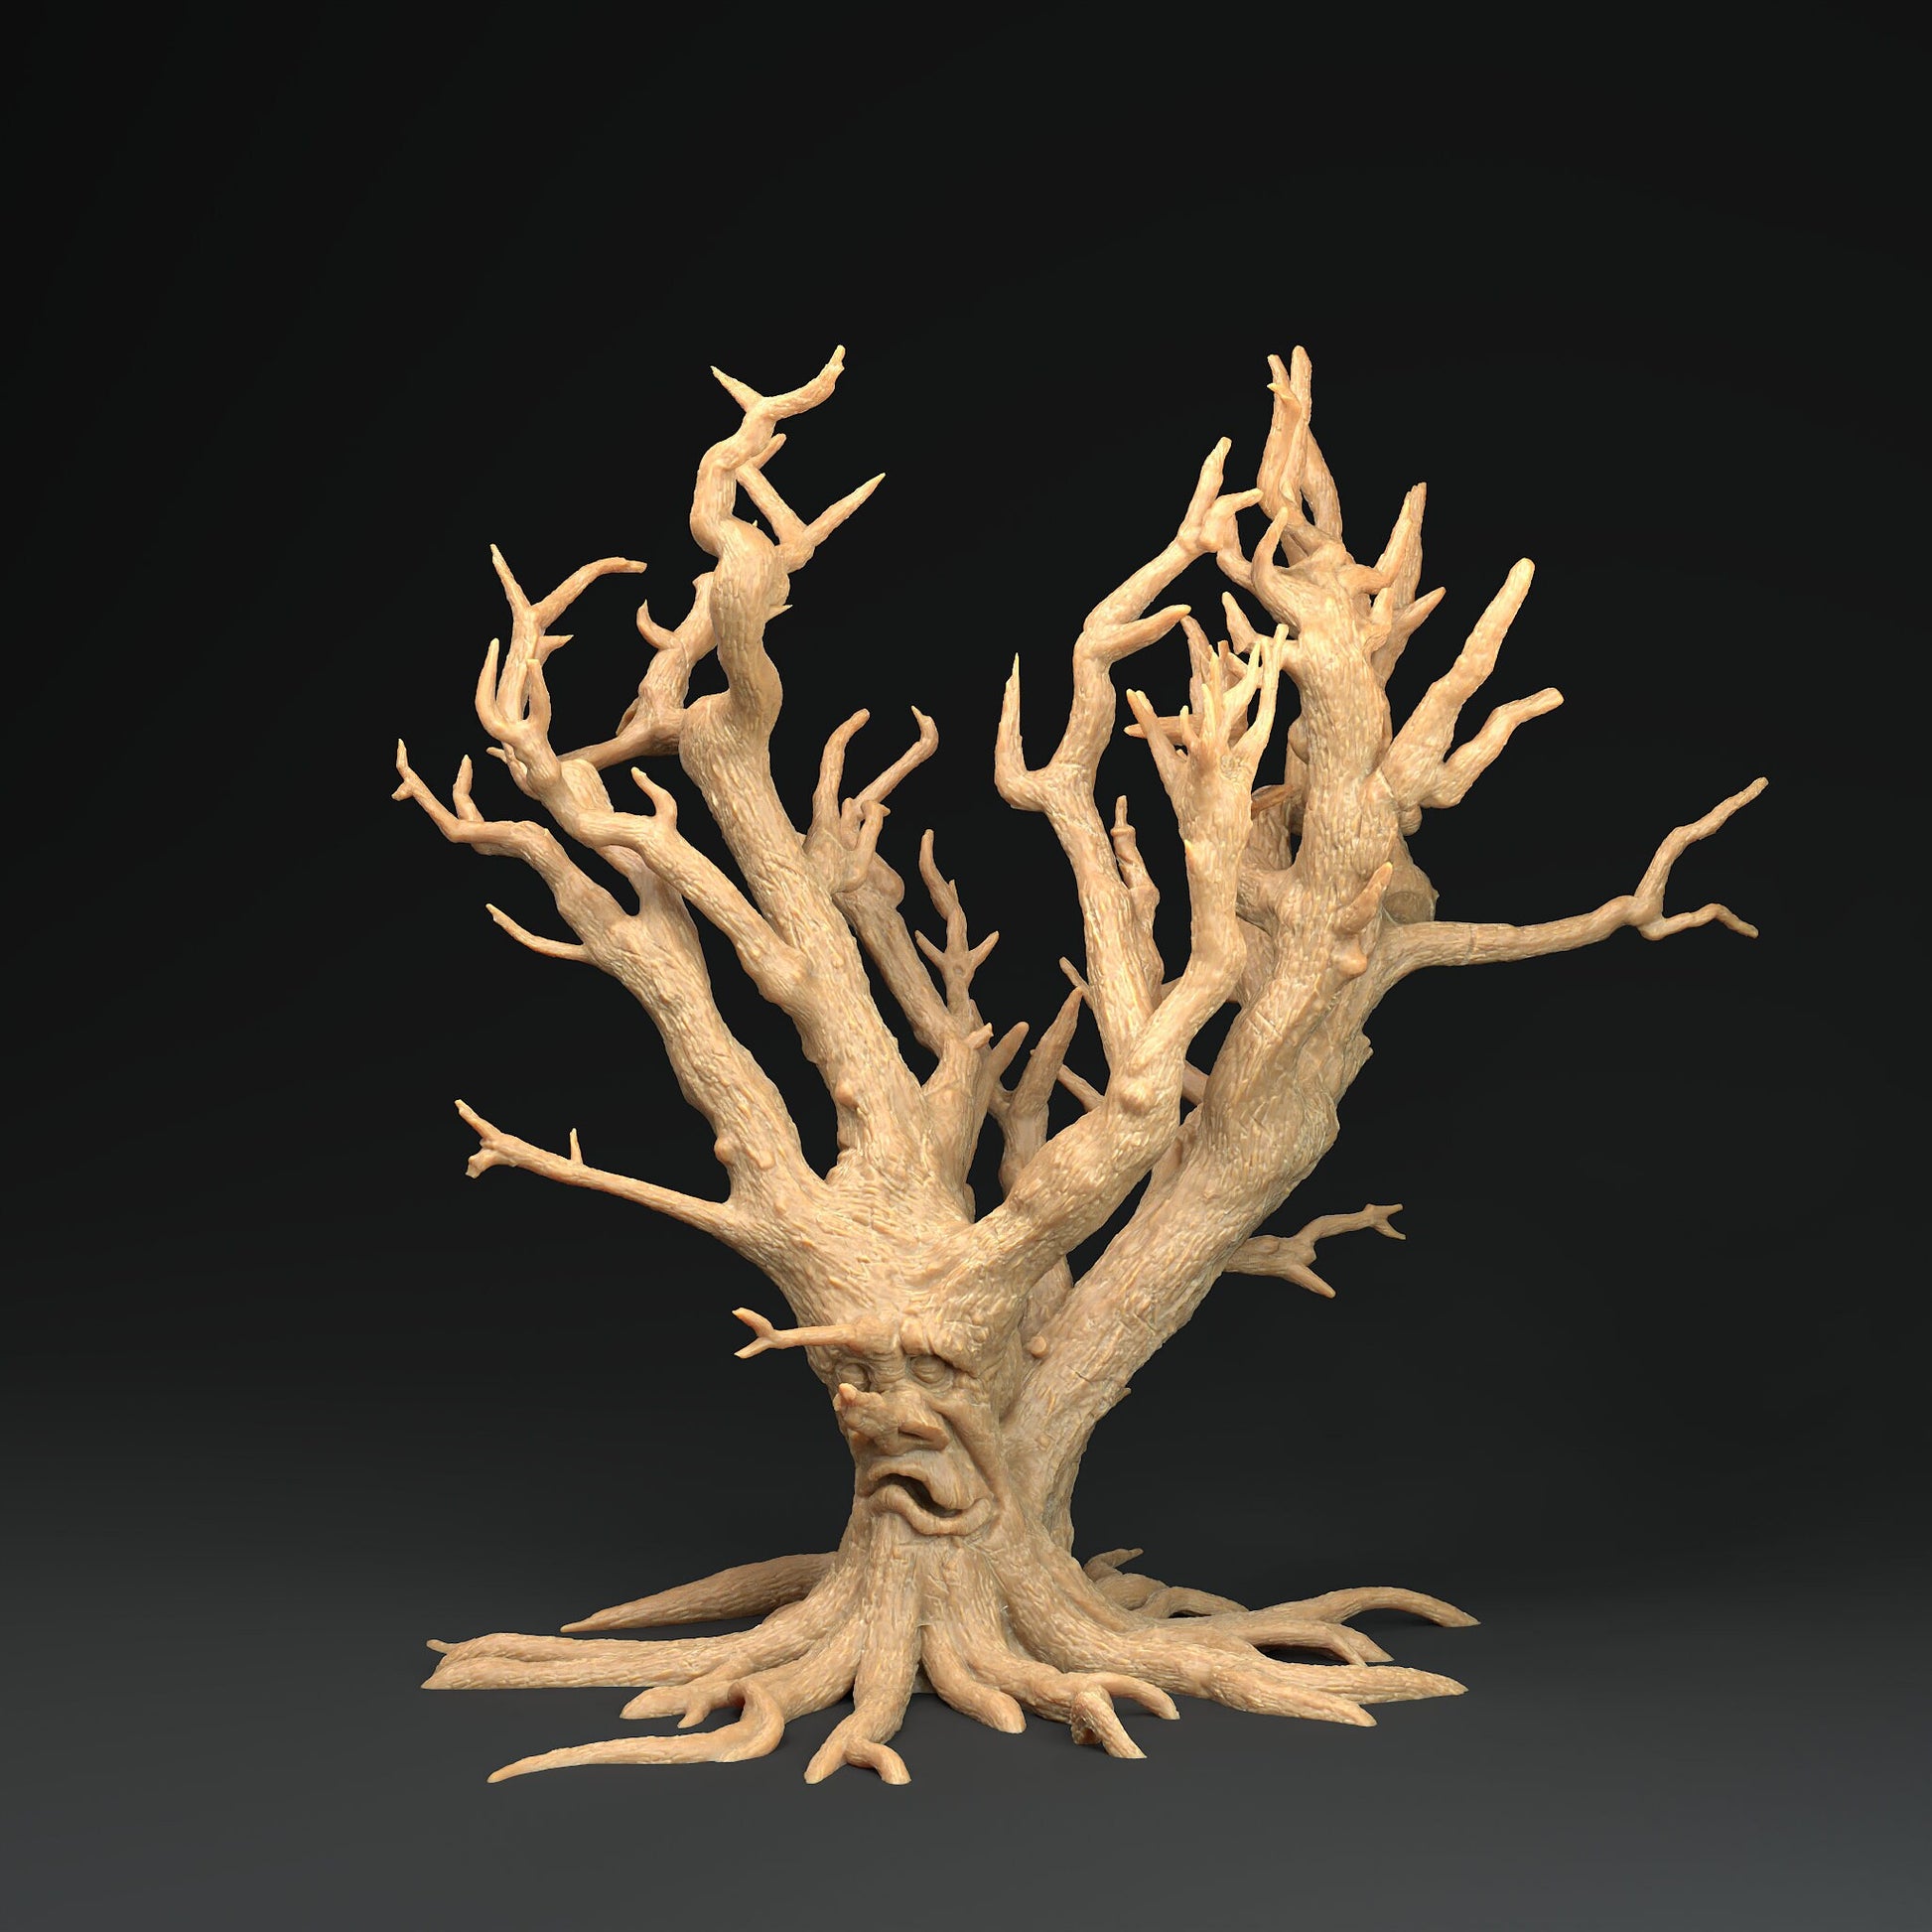 Awakened Trees | RPG Miniature for Dungeons and Dragons|Pathfinder|Tabletop Wargaming | Fey Miniature | Dragon Trappers Lodge